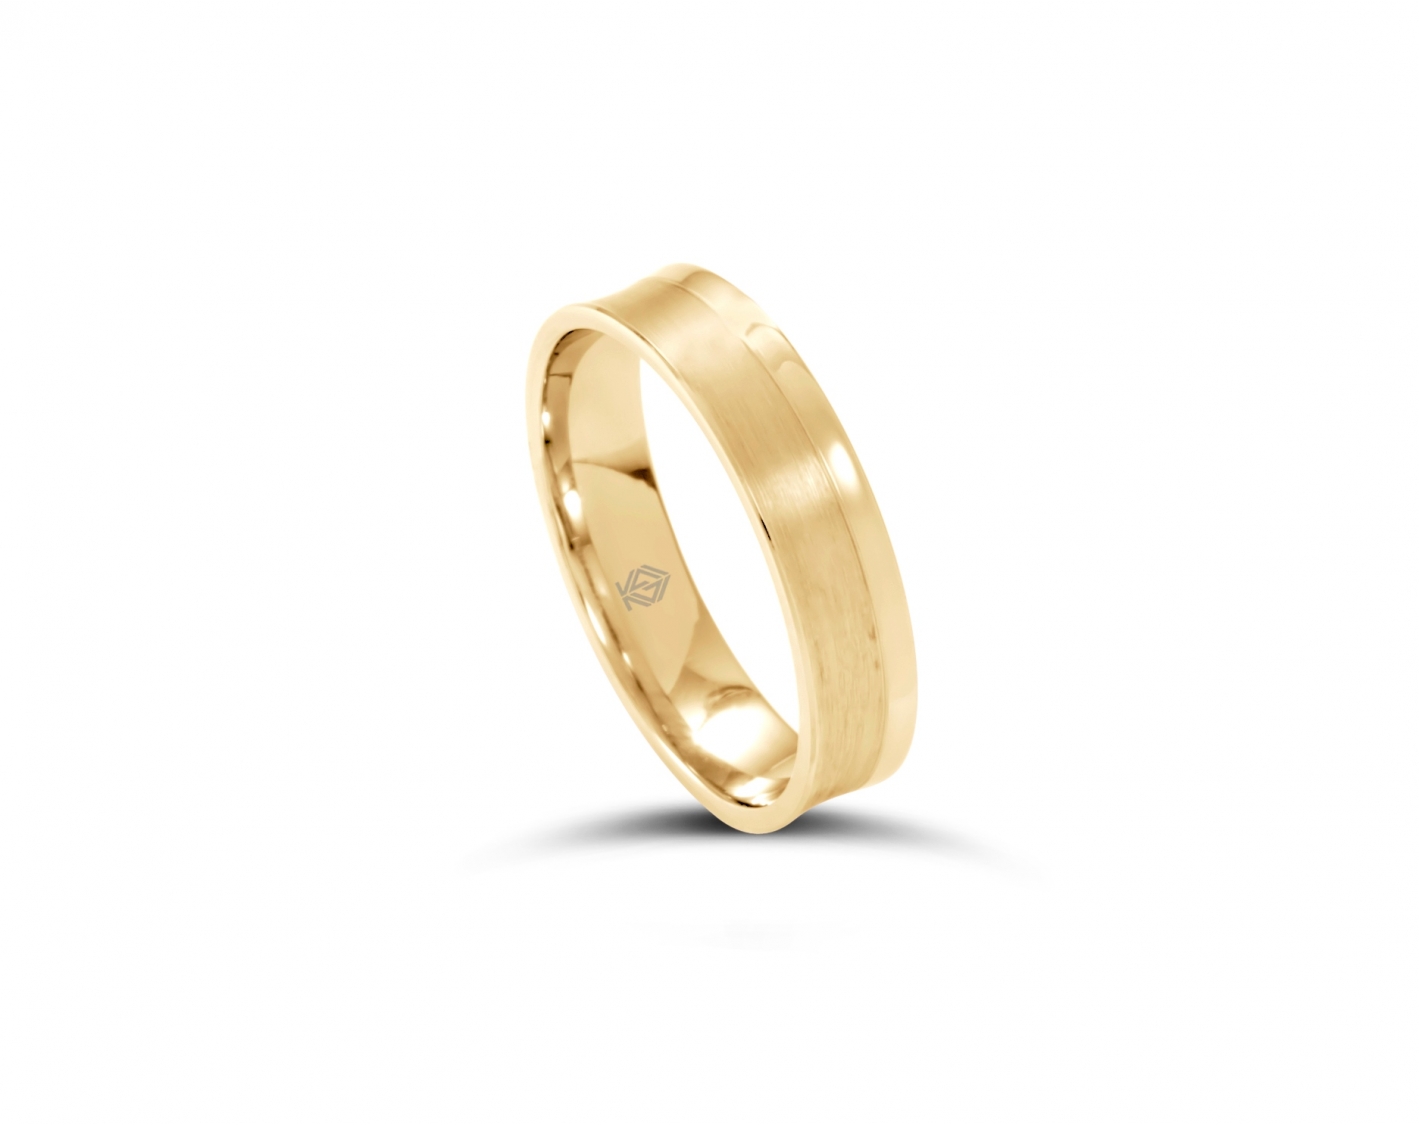 18k yellow gold 5,5mm two-toned* wedding band with colored edges